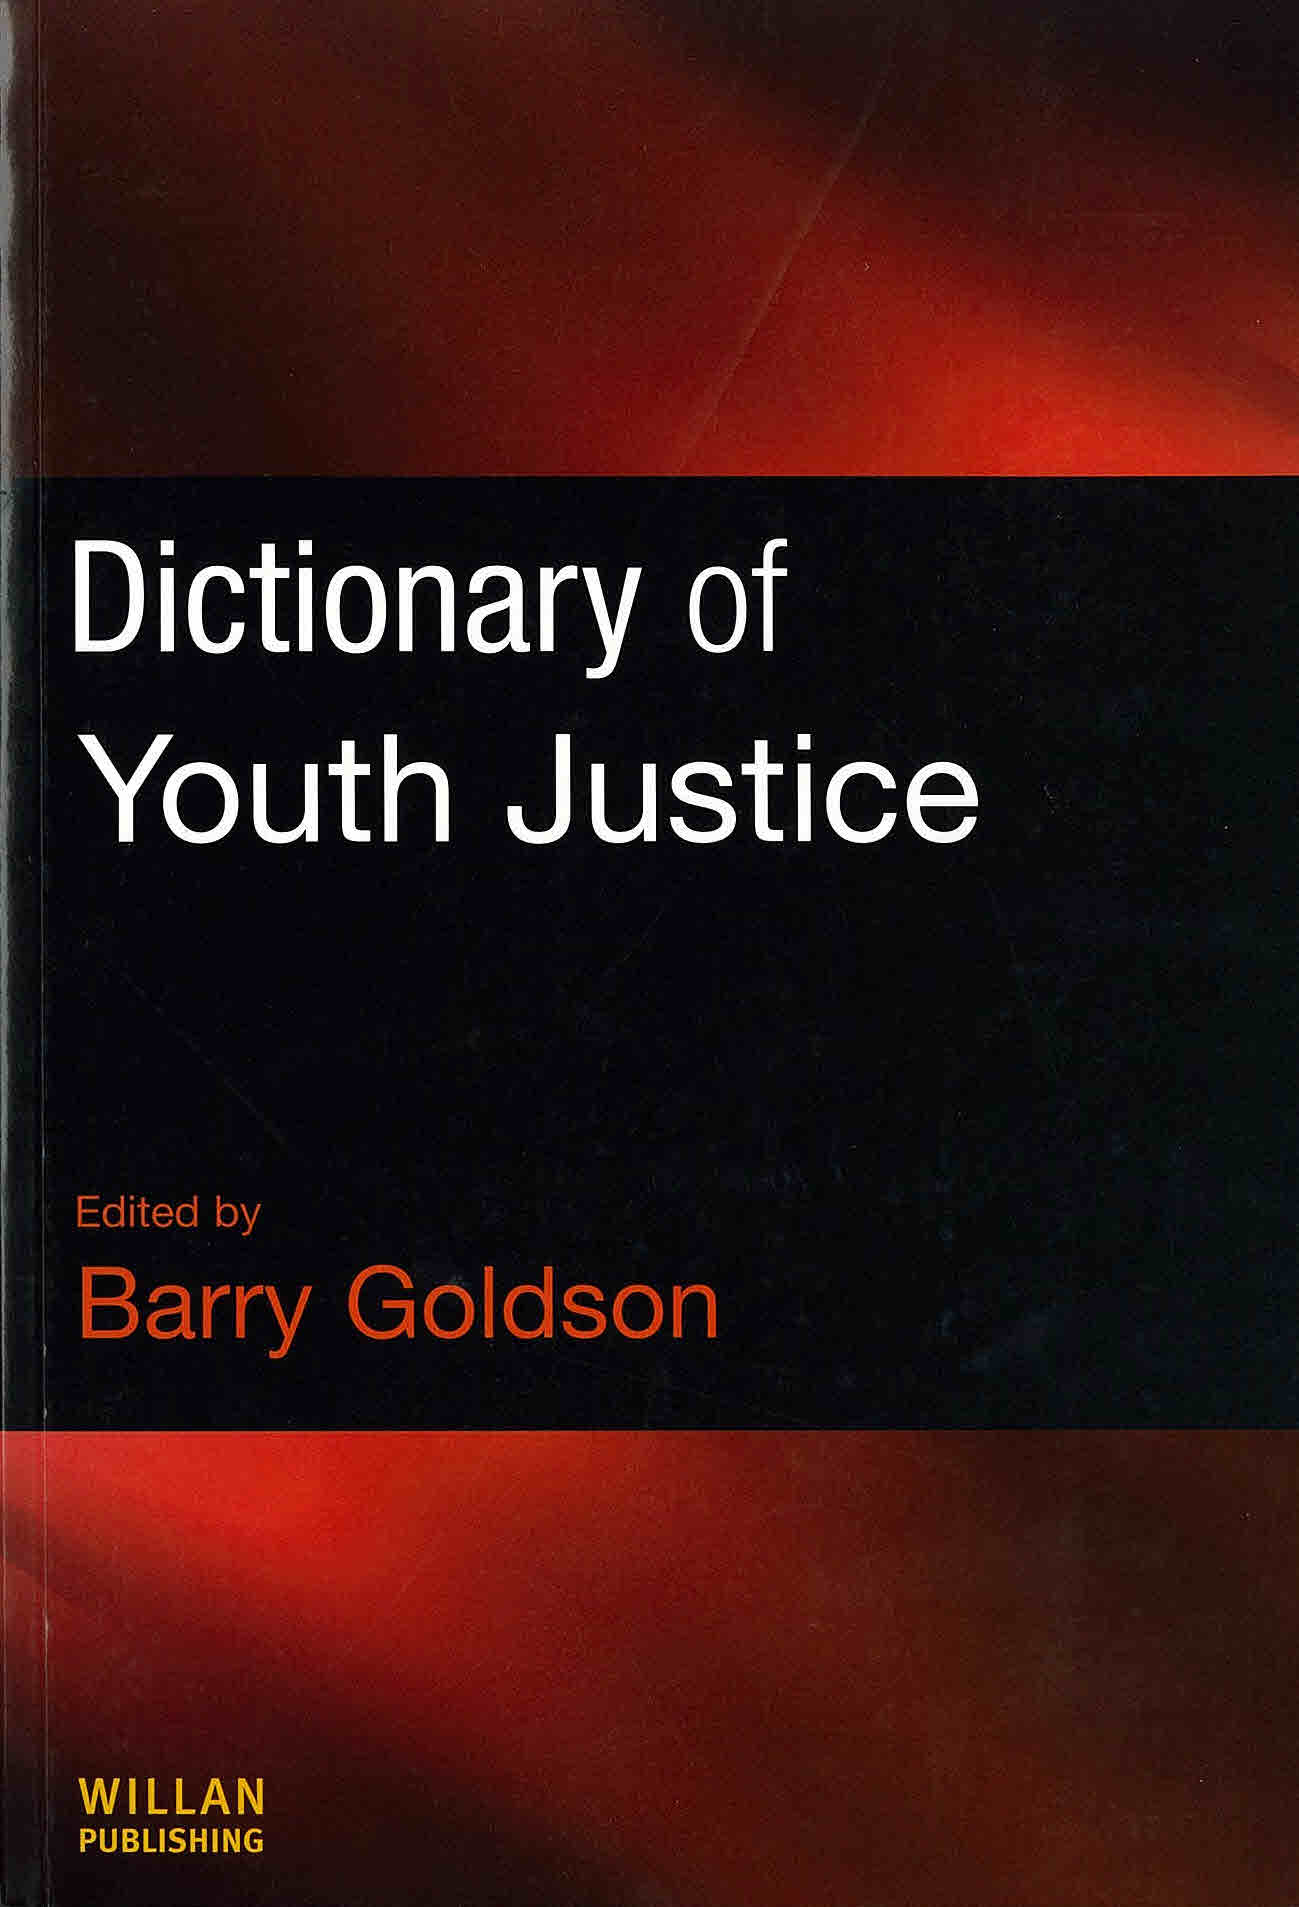 Dictionary of youth justice